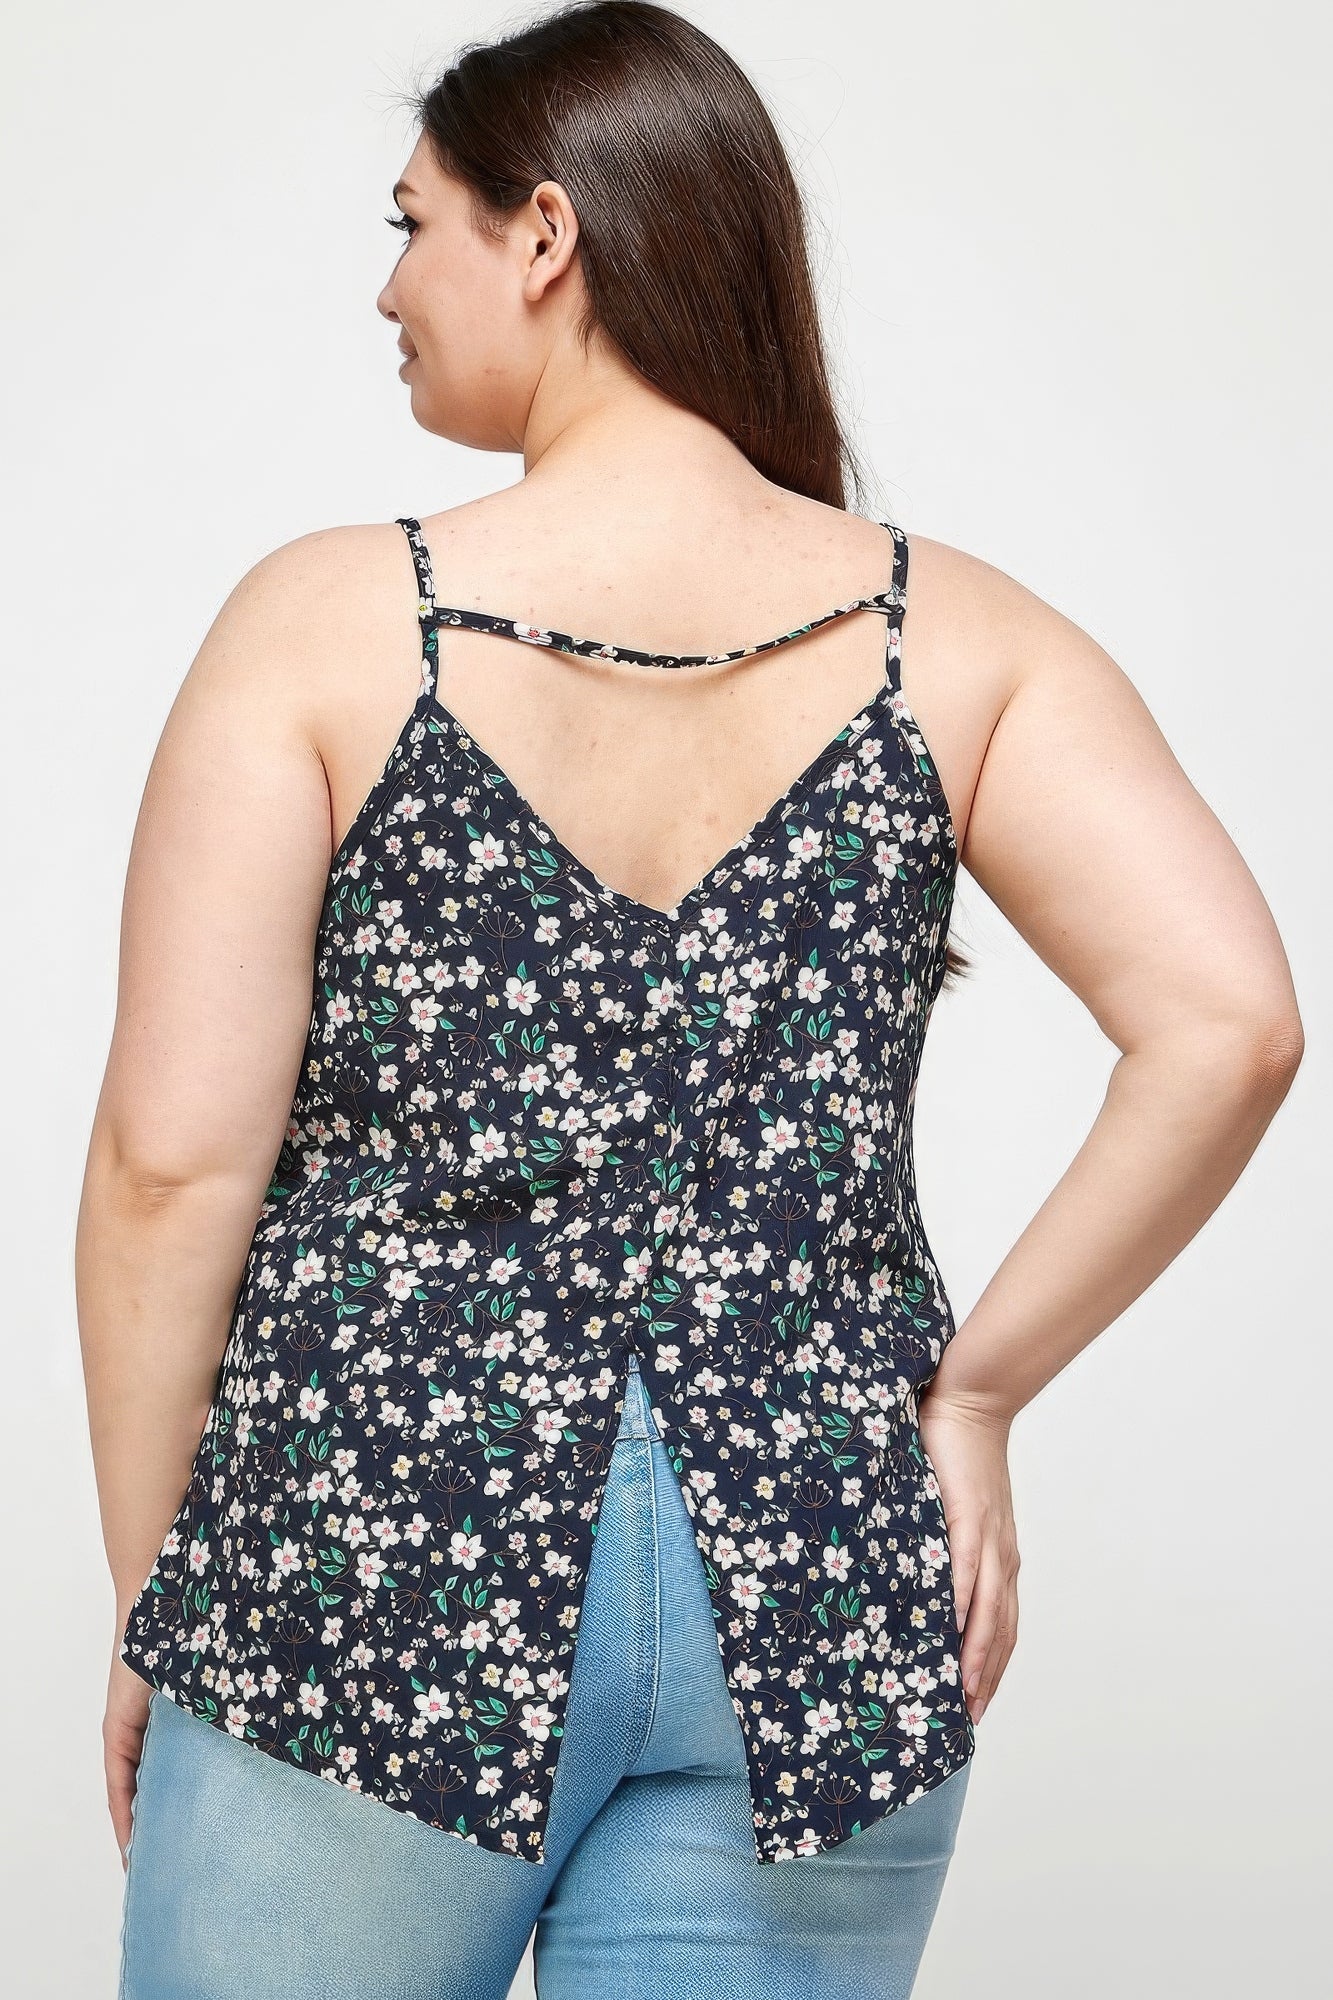 THE HALEY Plus Size, Ditsy Floral Print Cami Top